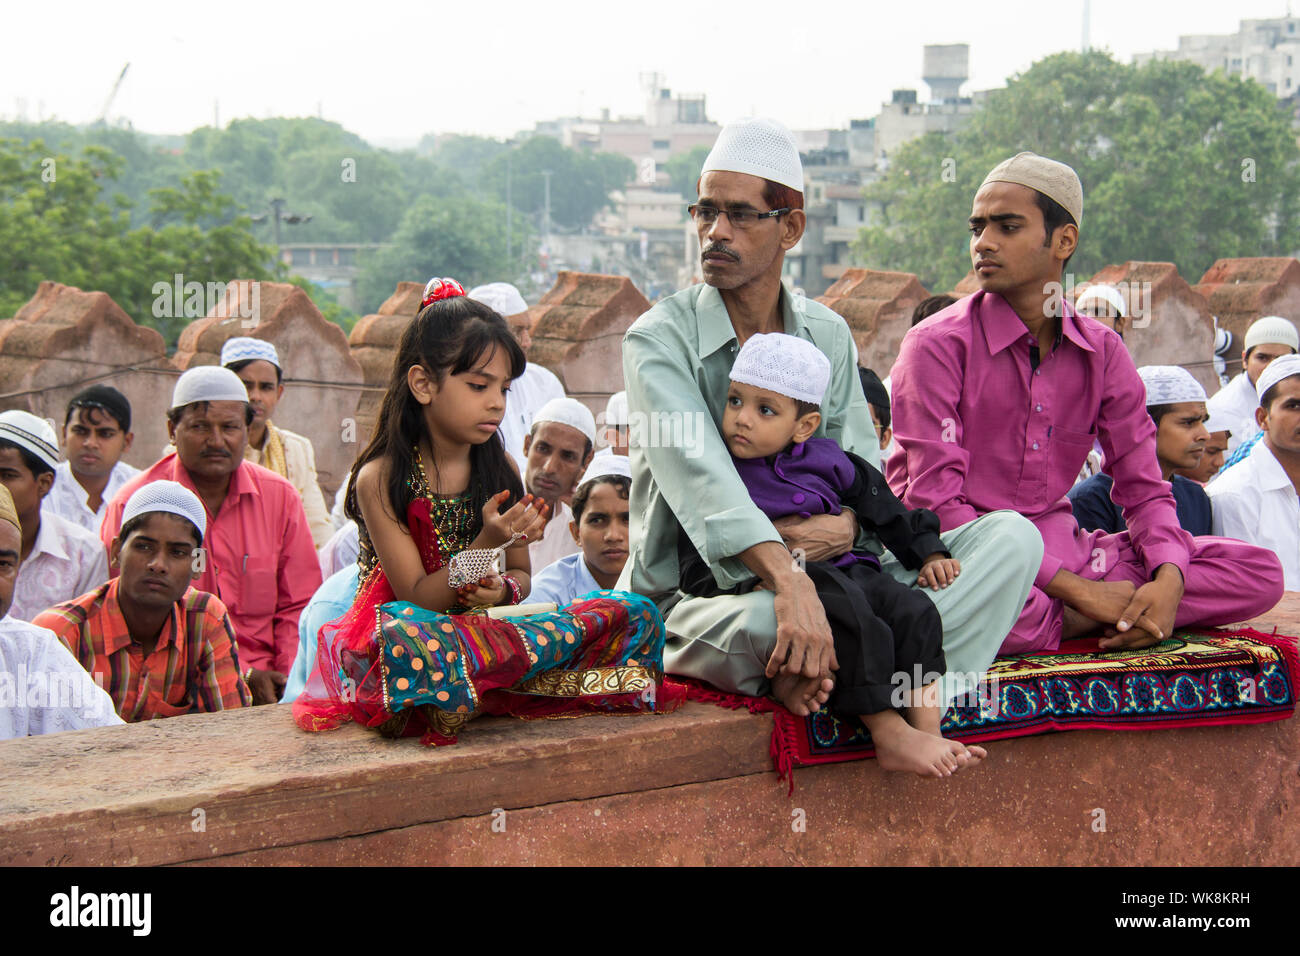 People get together for namaz at a mosque, Jama Masjid, Old Delhi, India Stock Photo